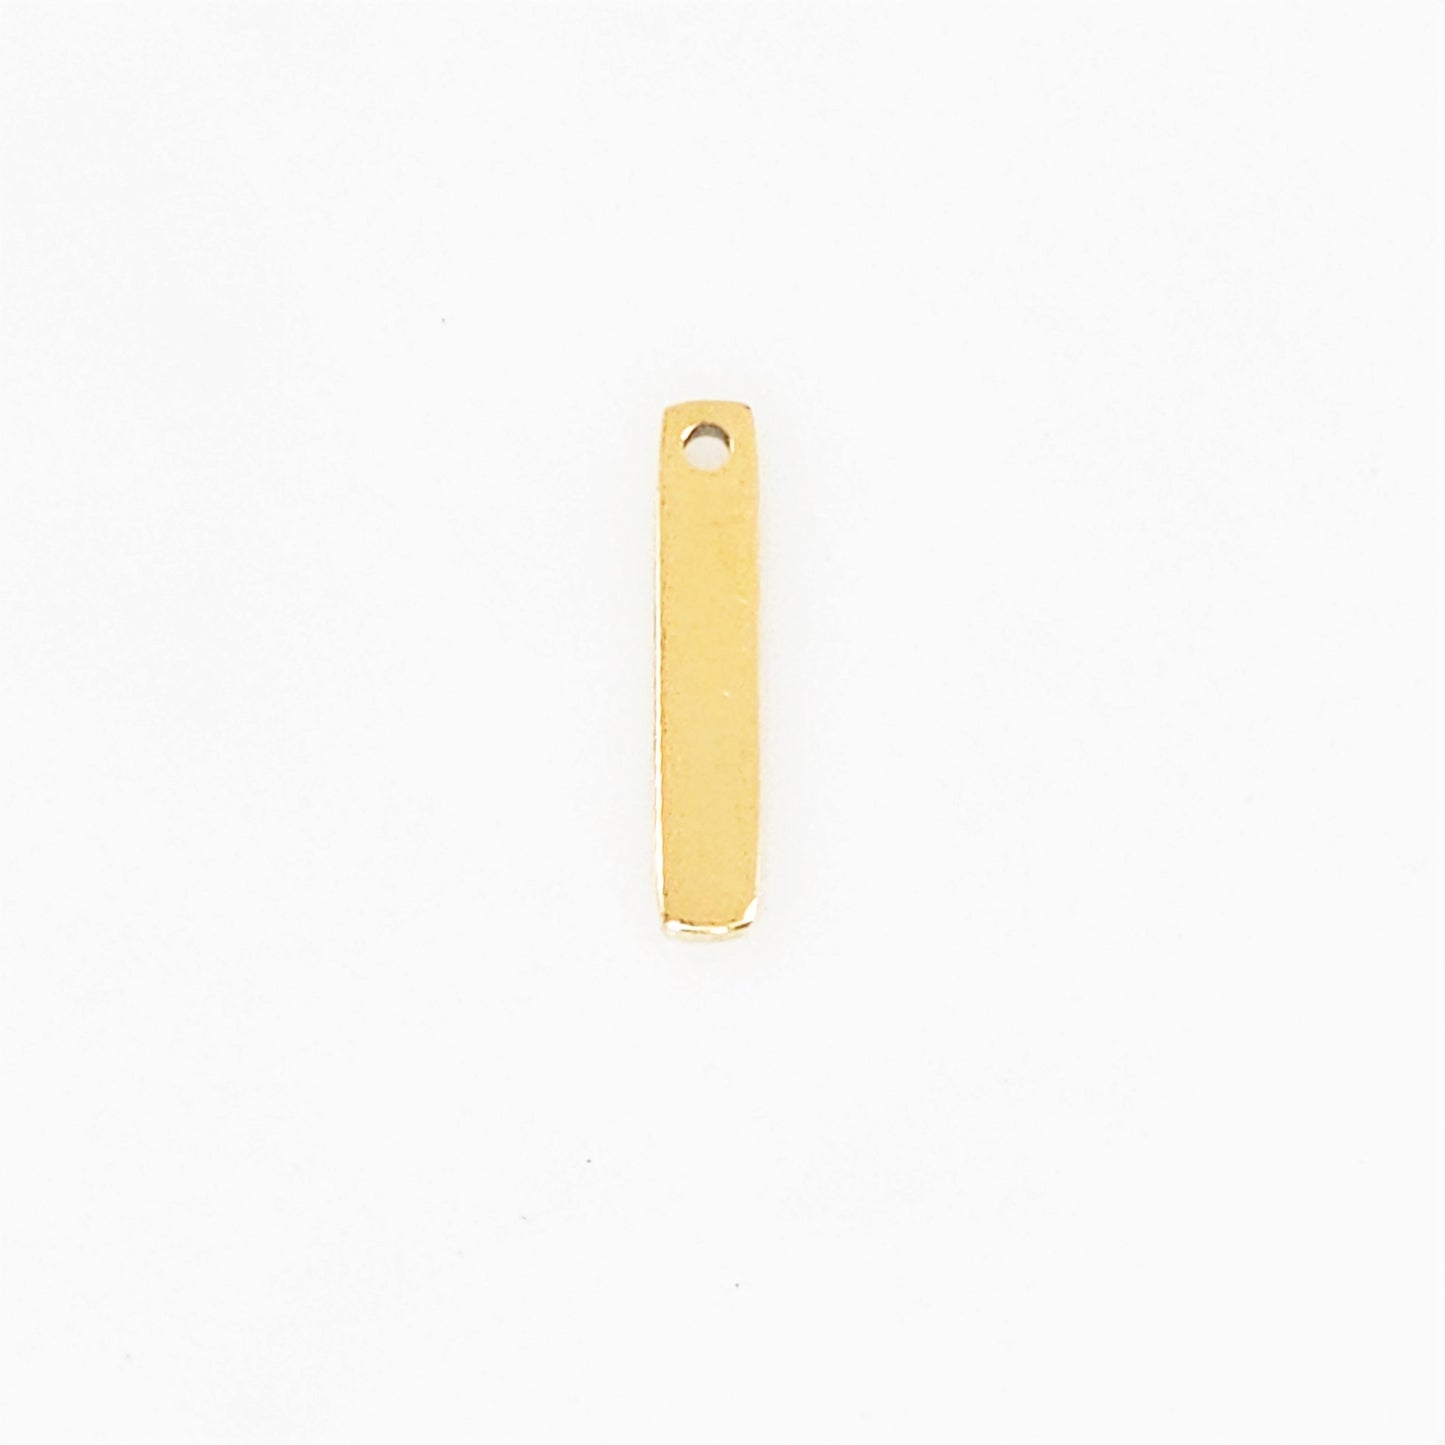 Gold Plated Bar - 3mm x 16mm